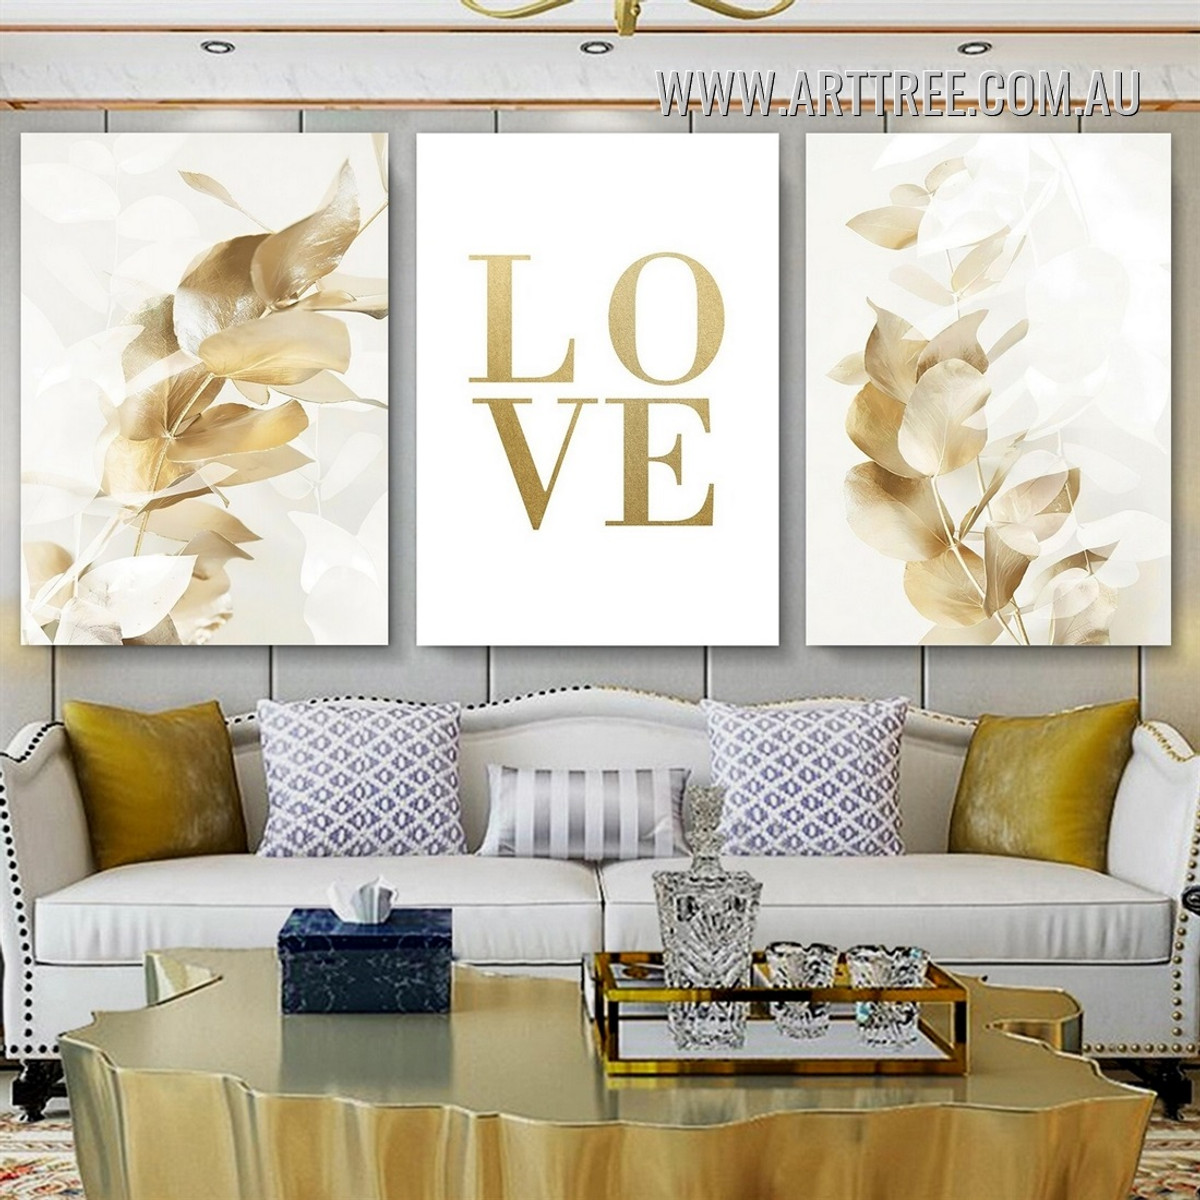 Golden Eucalyptus Leafage Scandinavian Minimalist Typography Stretched Artwork Photo 3 Panel Canvas Print for Room Wall Disposition